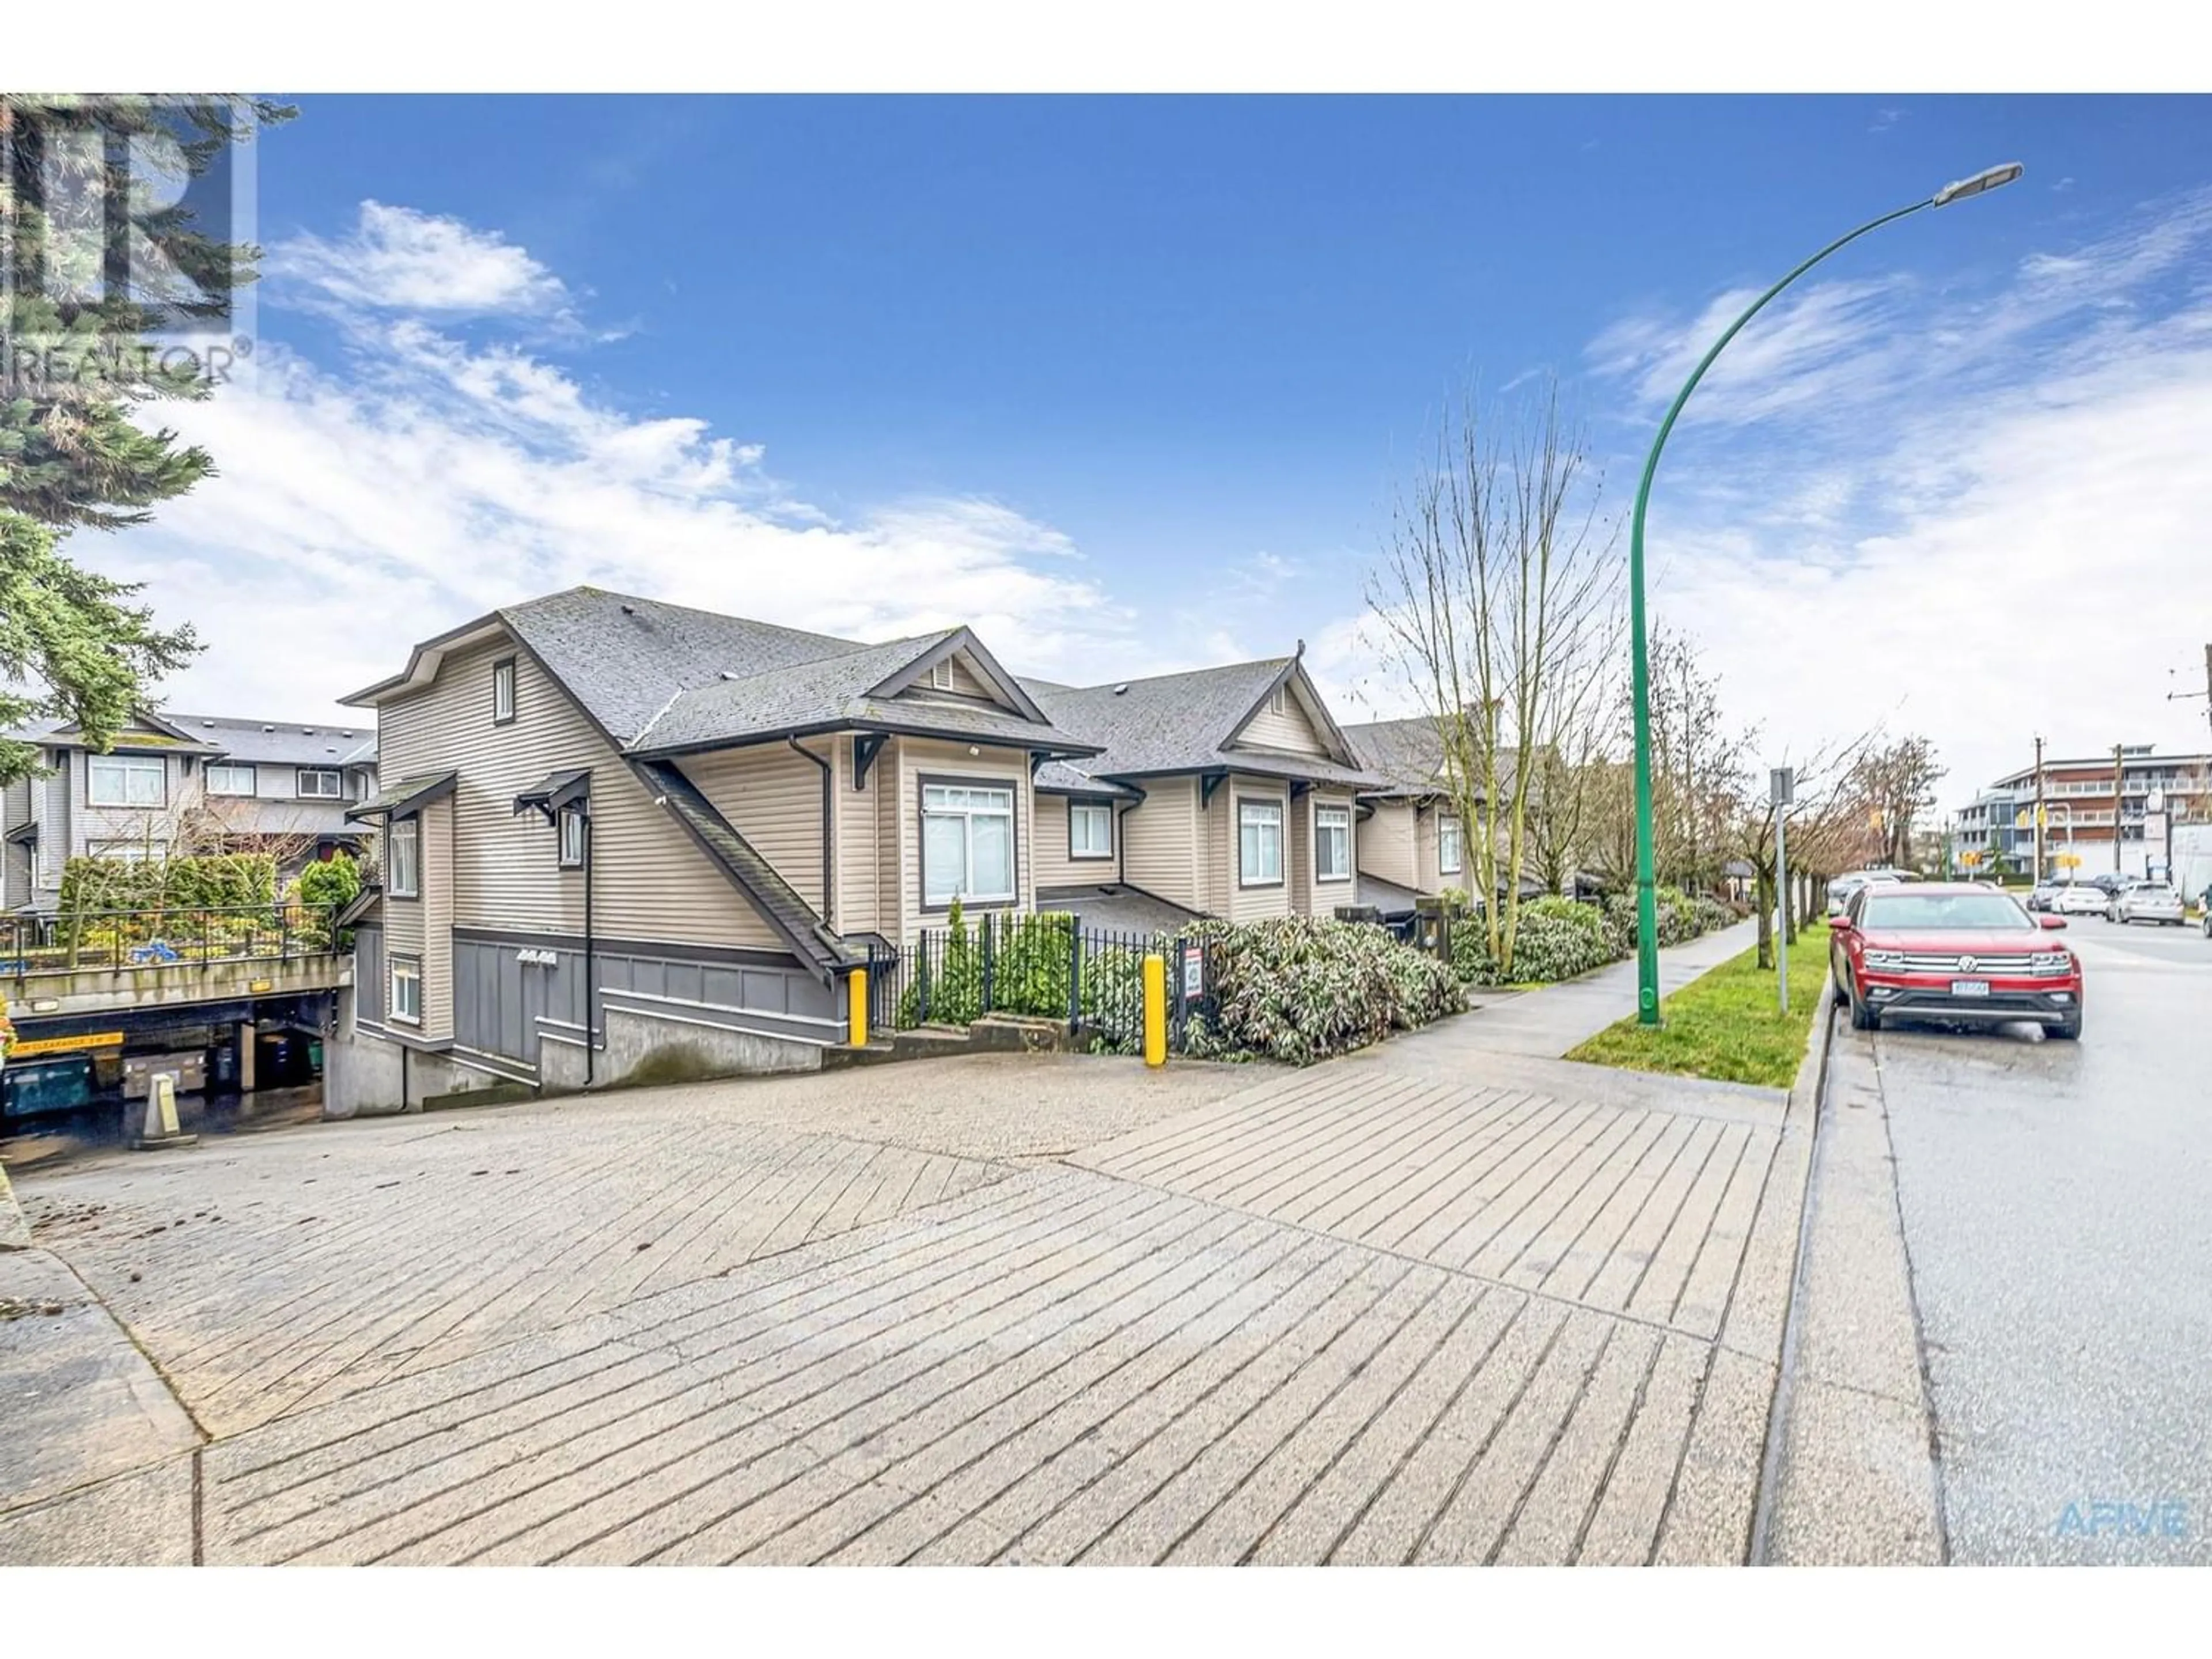 Frontside or backside of a home for 11 7428 14 AVENUE, Burnaby British Columbia V3N0C2